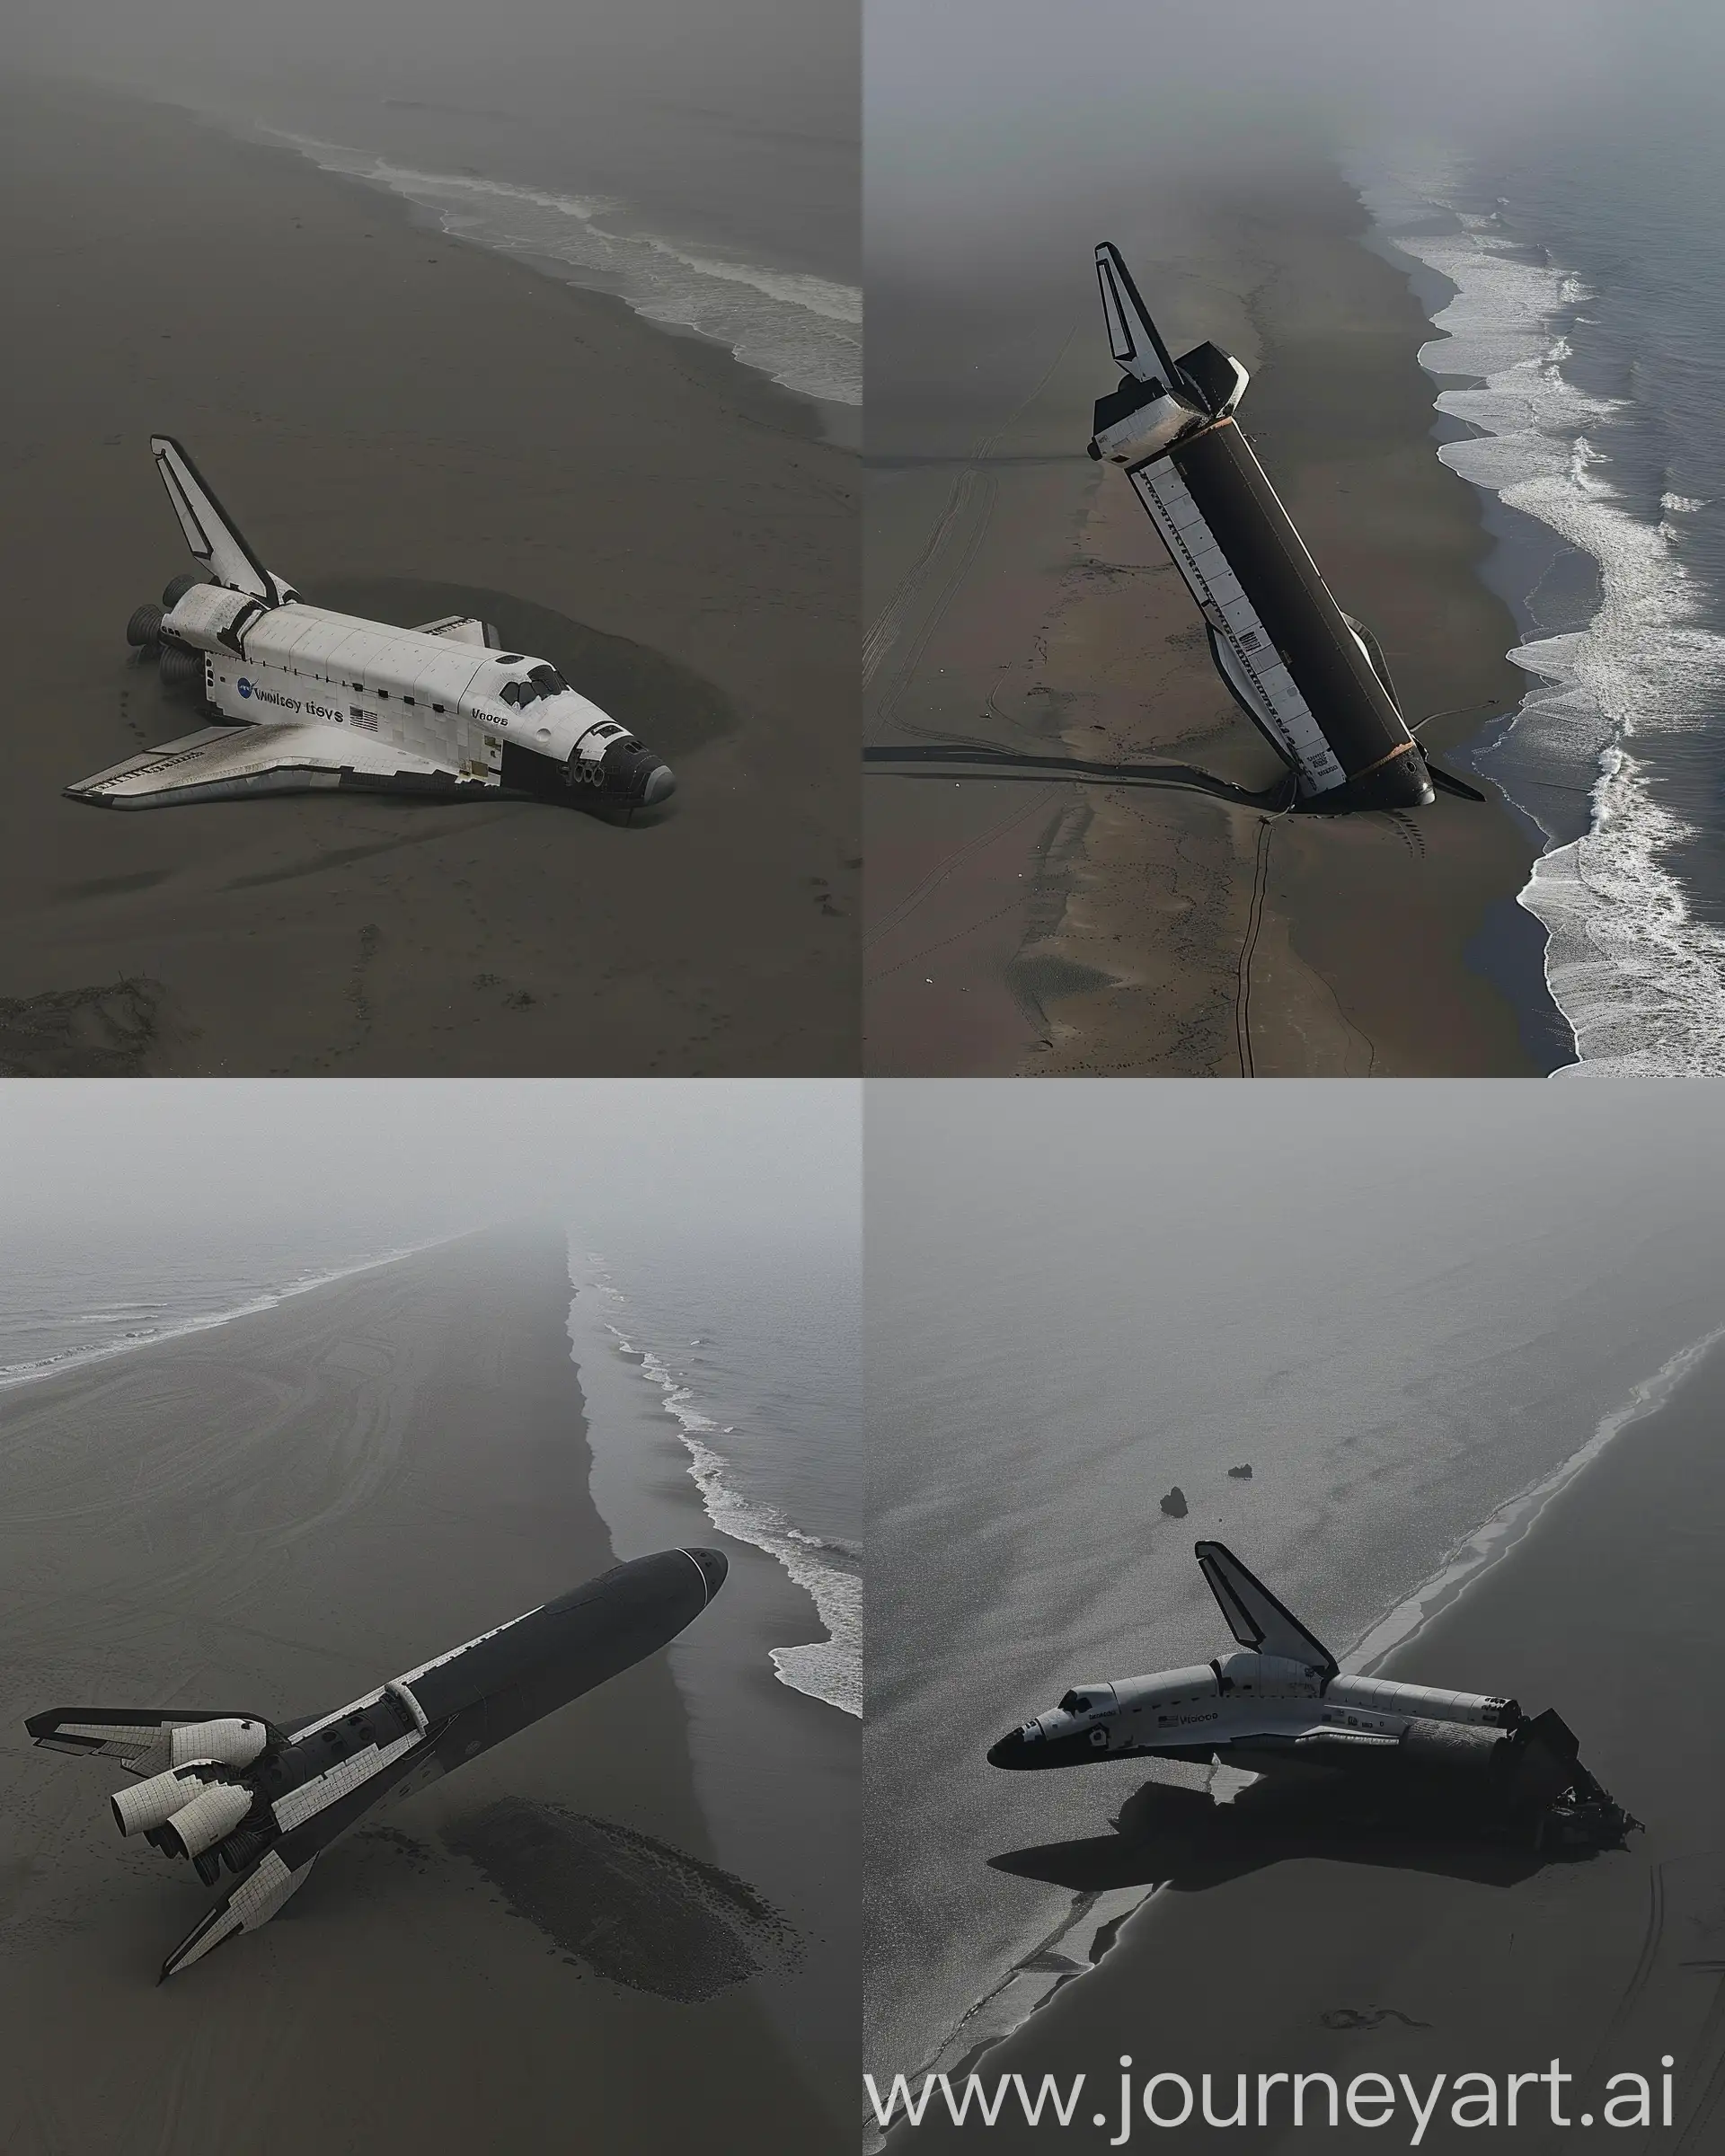 Sea view aerial far-sighted shot of a huge space shuttle crashed on the quiet shore in a foggy atmosphere and half the shuttle buried in the sand --ar 35:44 --sref 2540277310 --sw 50 --stylize 0 --v 6 --c 0